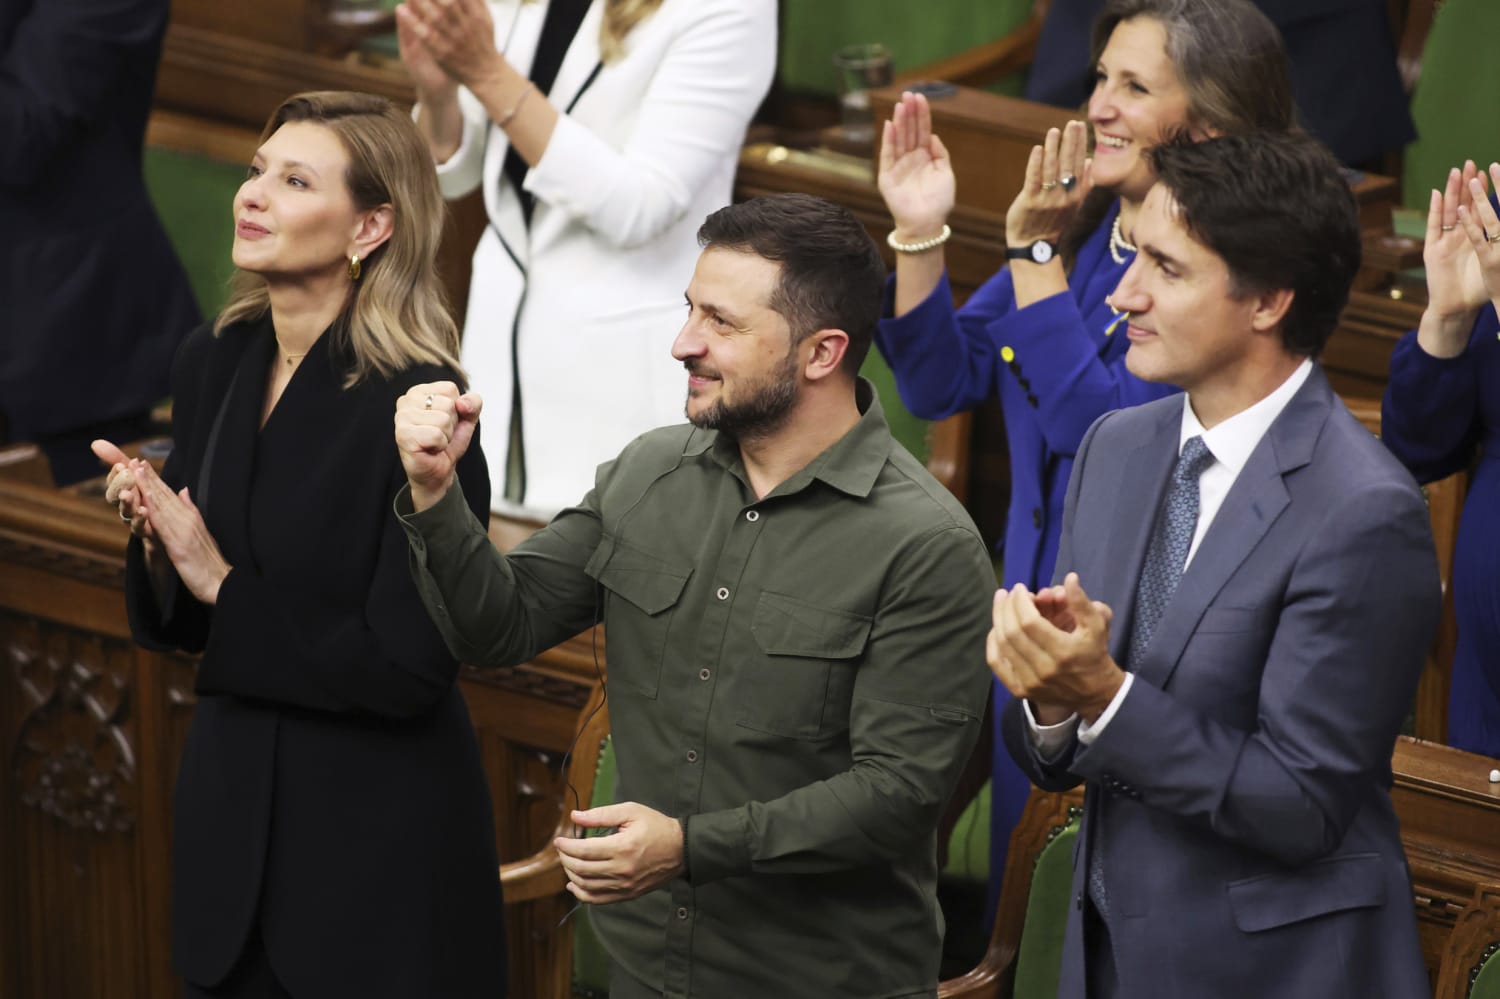 Canada’s Prime Minister apologizes after honoring Ukrainian Nazi veteran in Parliament